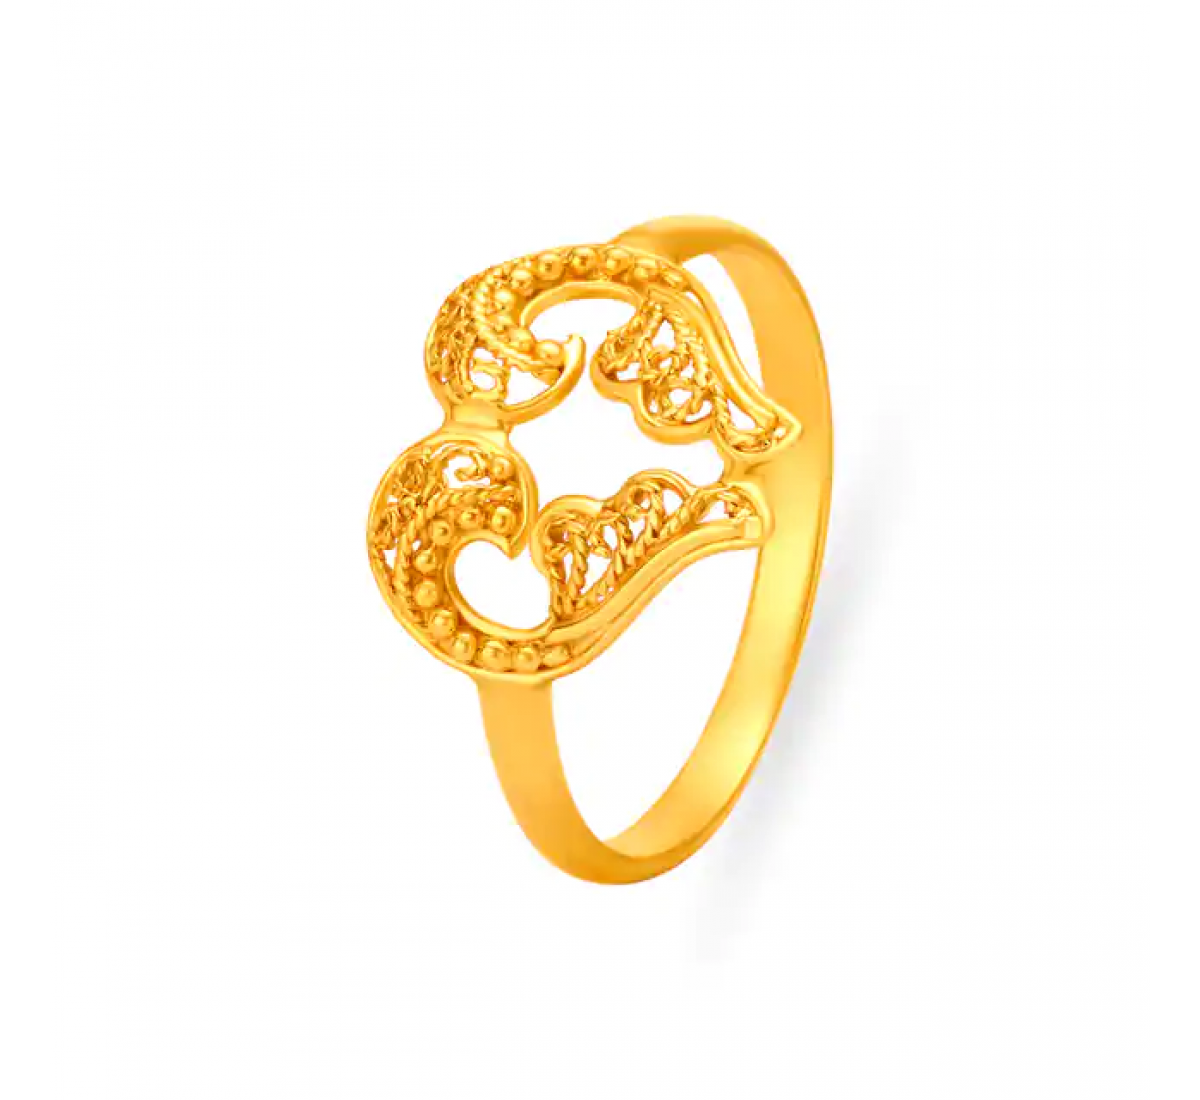 Fancy Colored Diamond Ring by Parade - The Reverie Collection by Parade